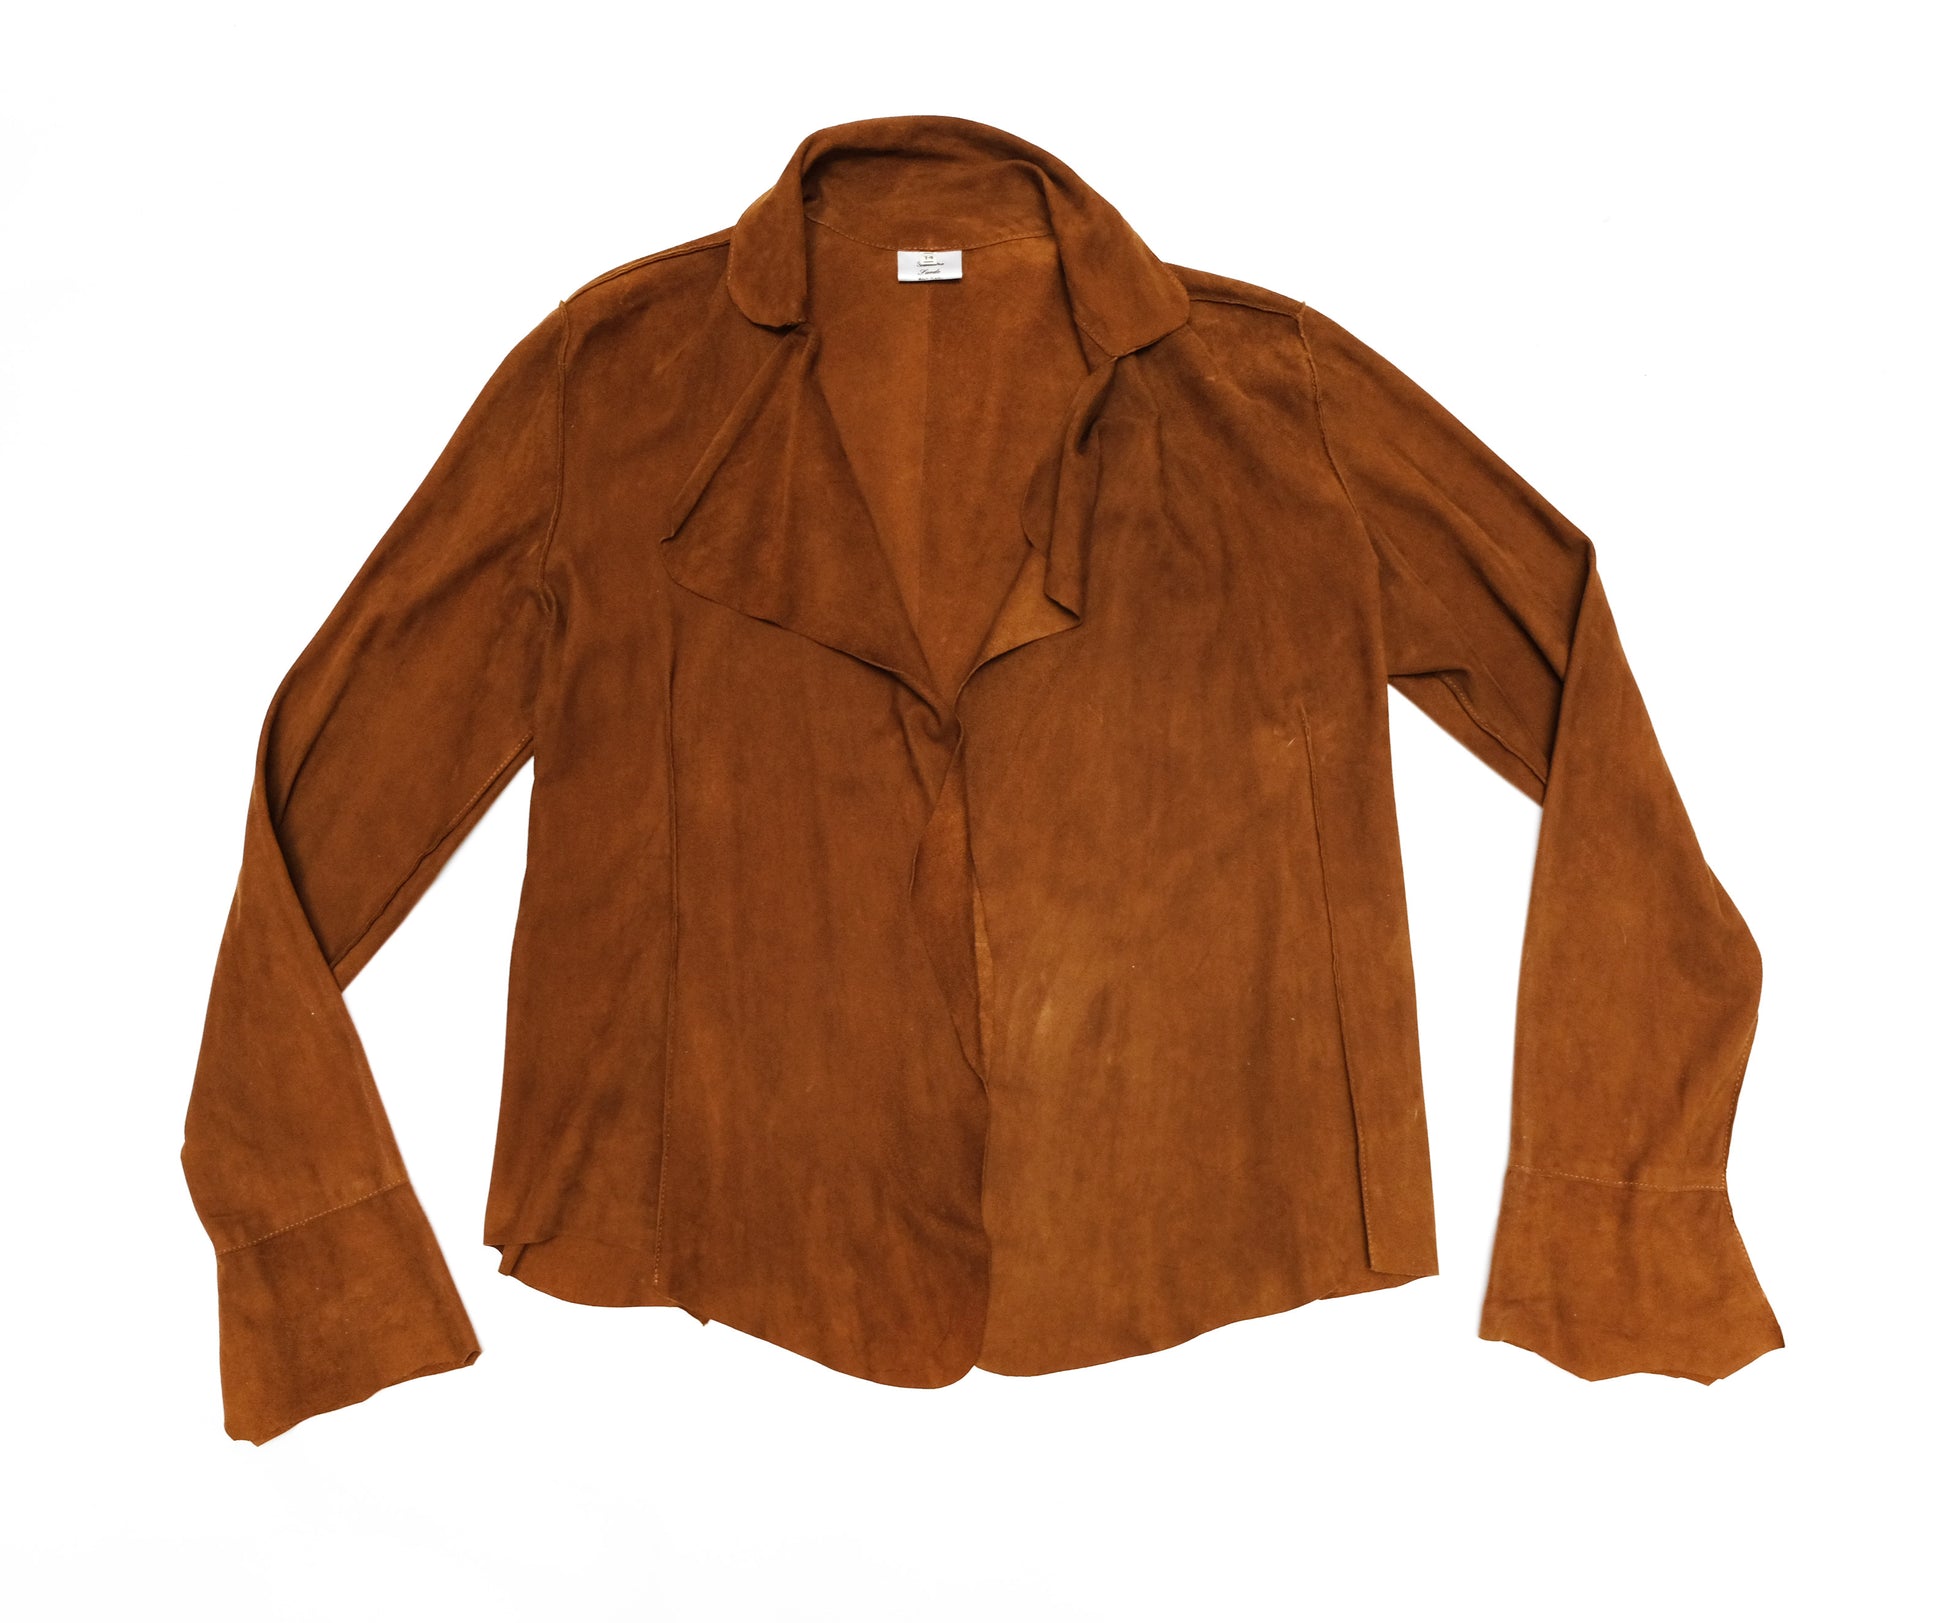 Jacket or Overshirt in Soft Brown Suede, UK14